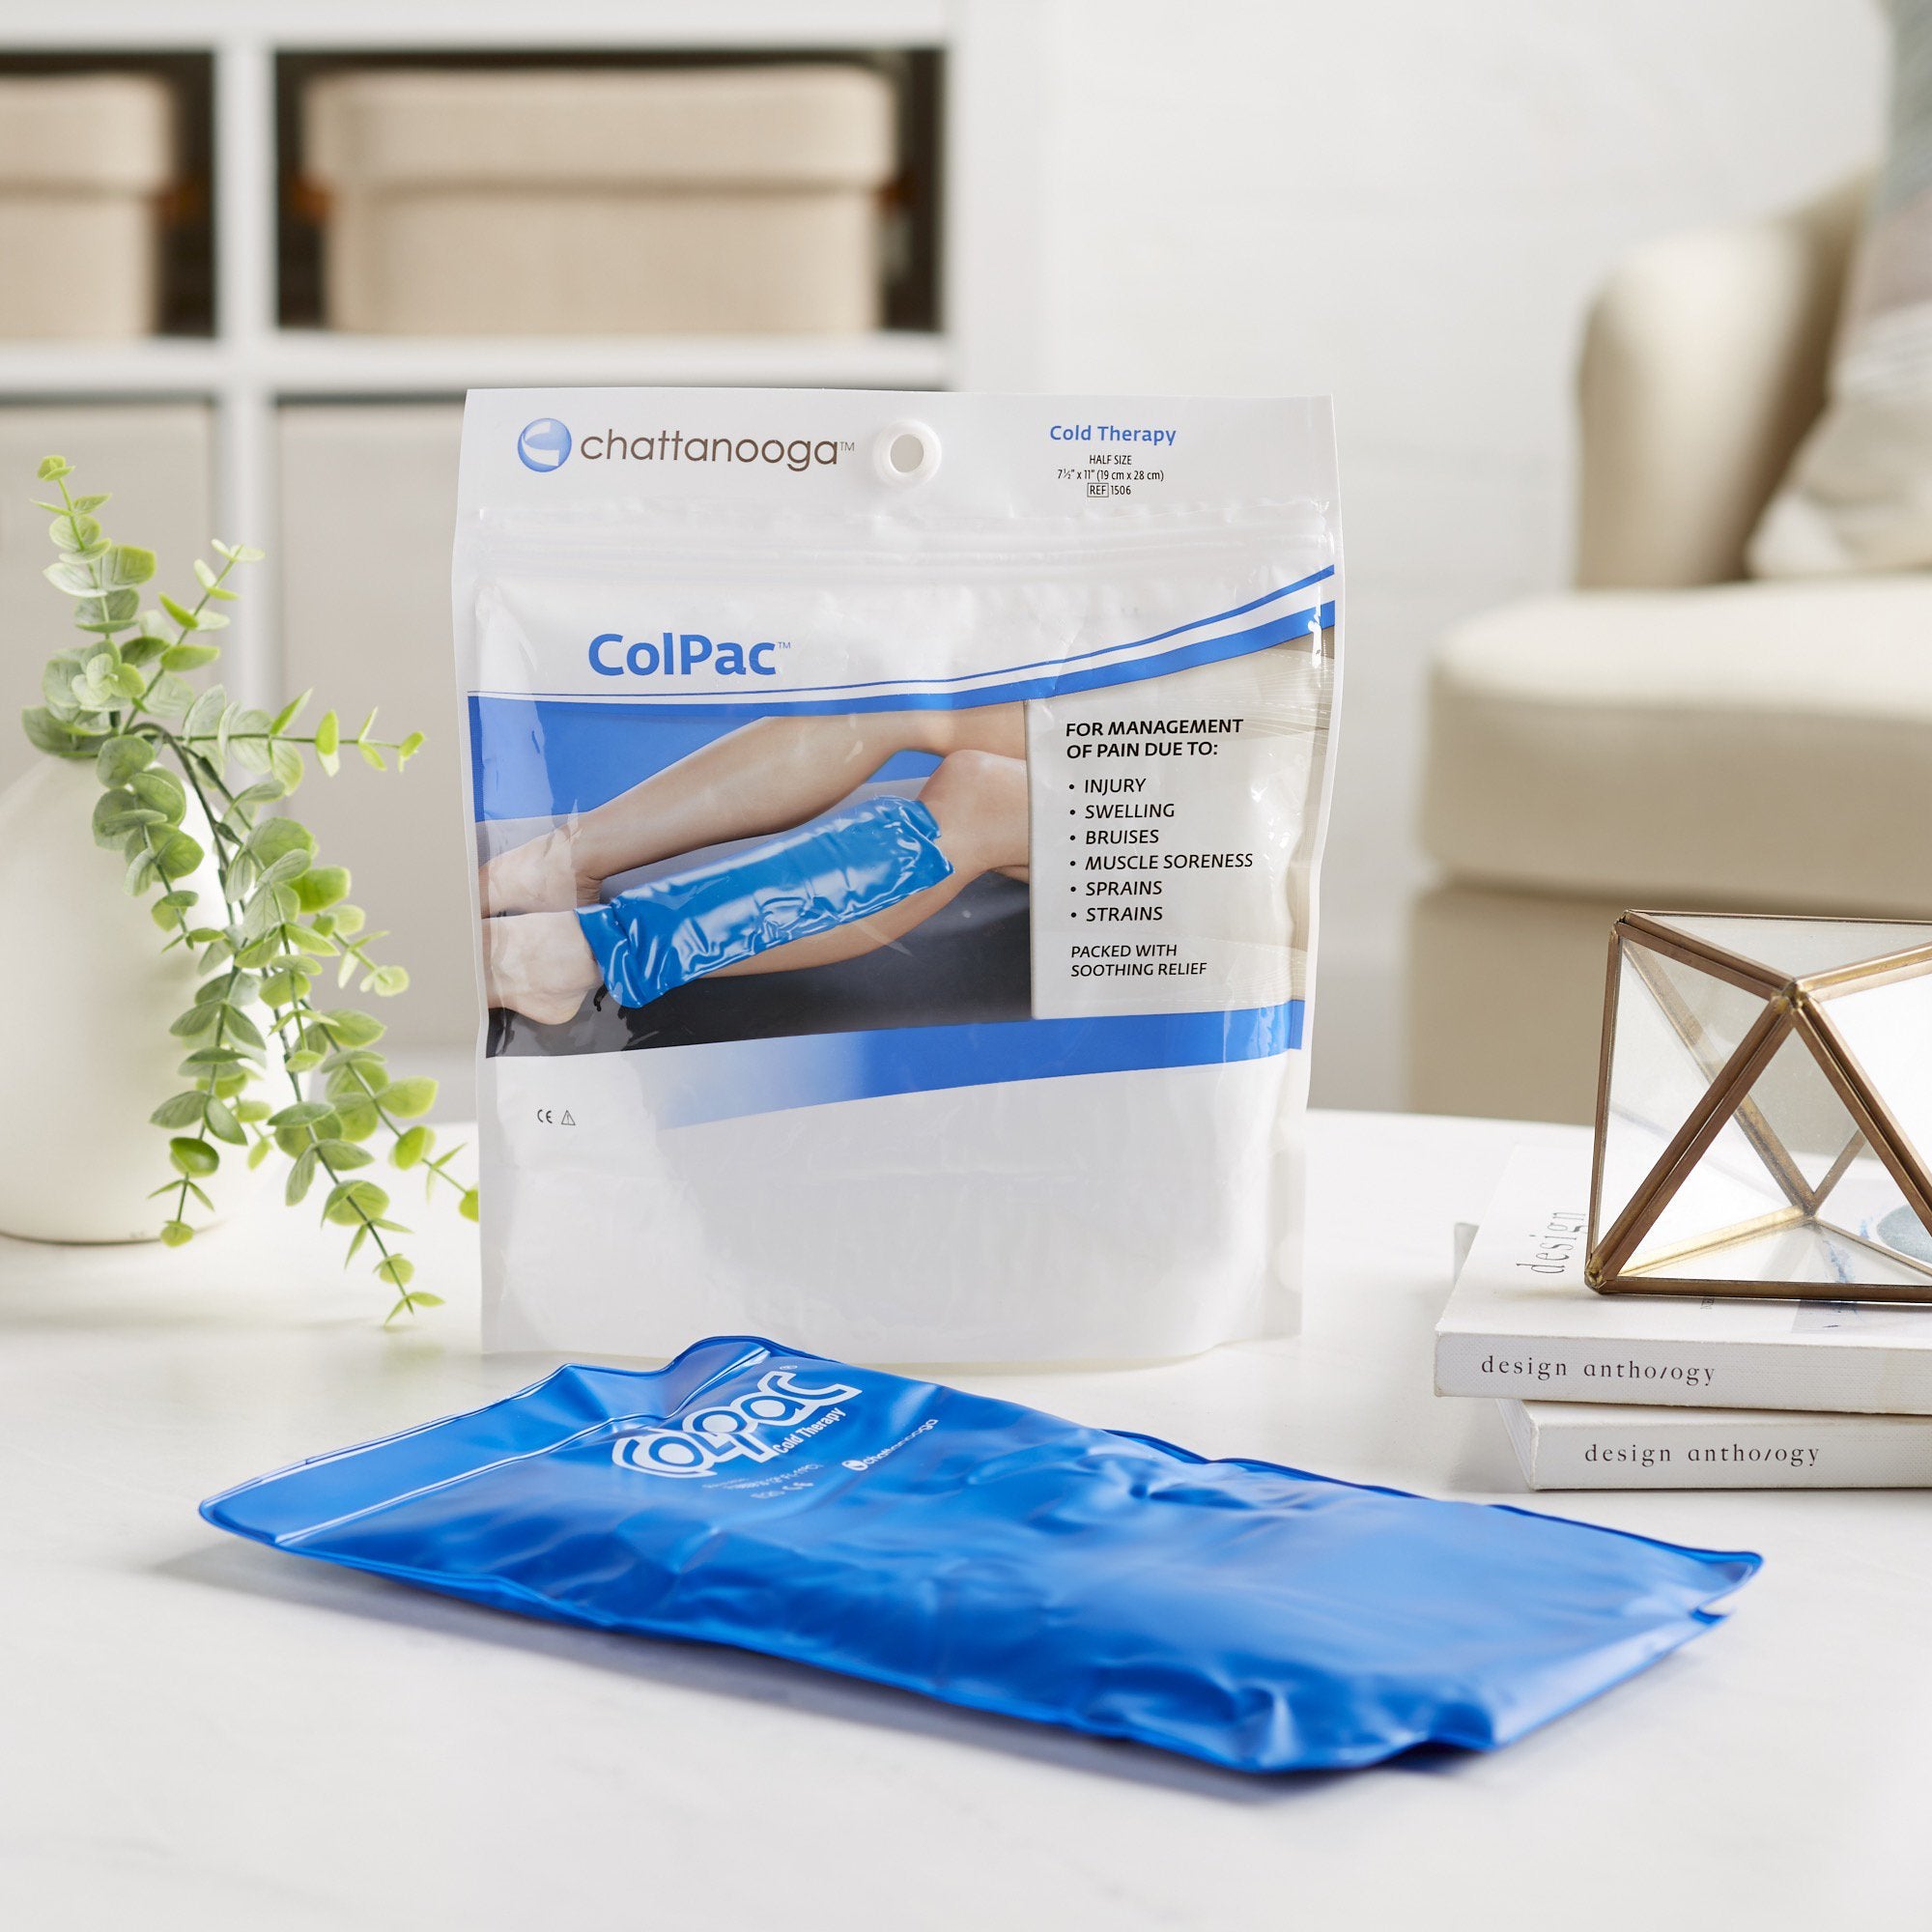 Health & Medicine>Hot & Cold Therapy>Cold - McKesson - Wasatch Medical Supply